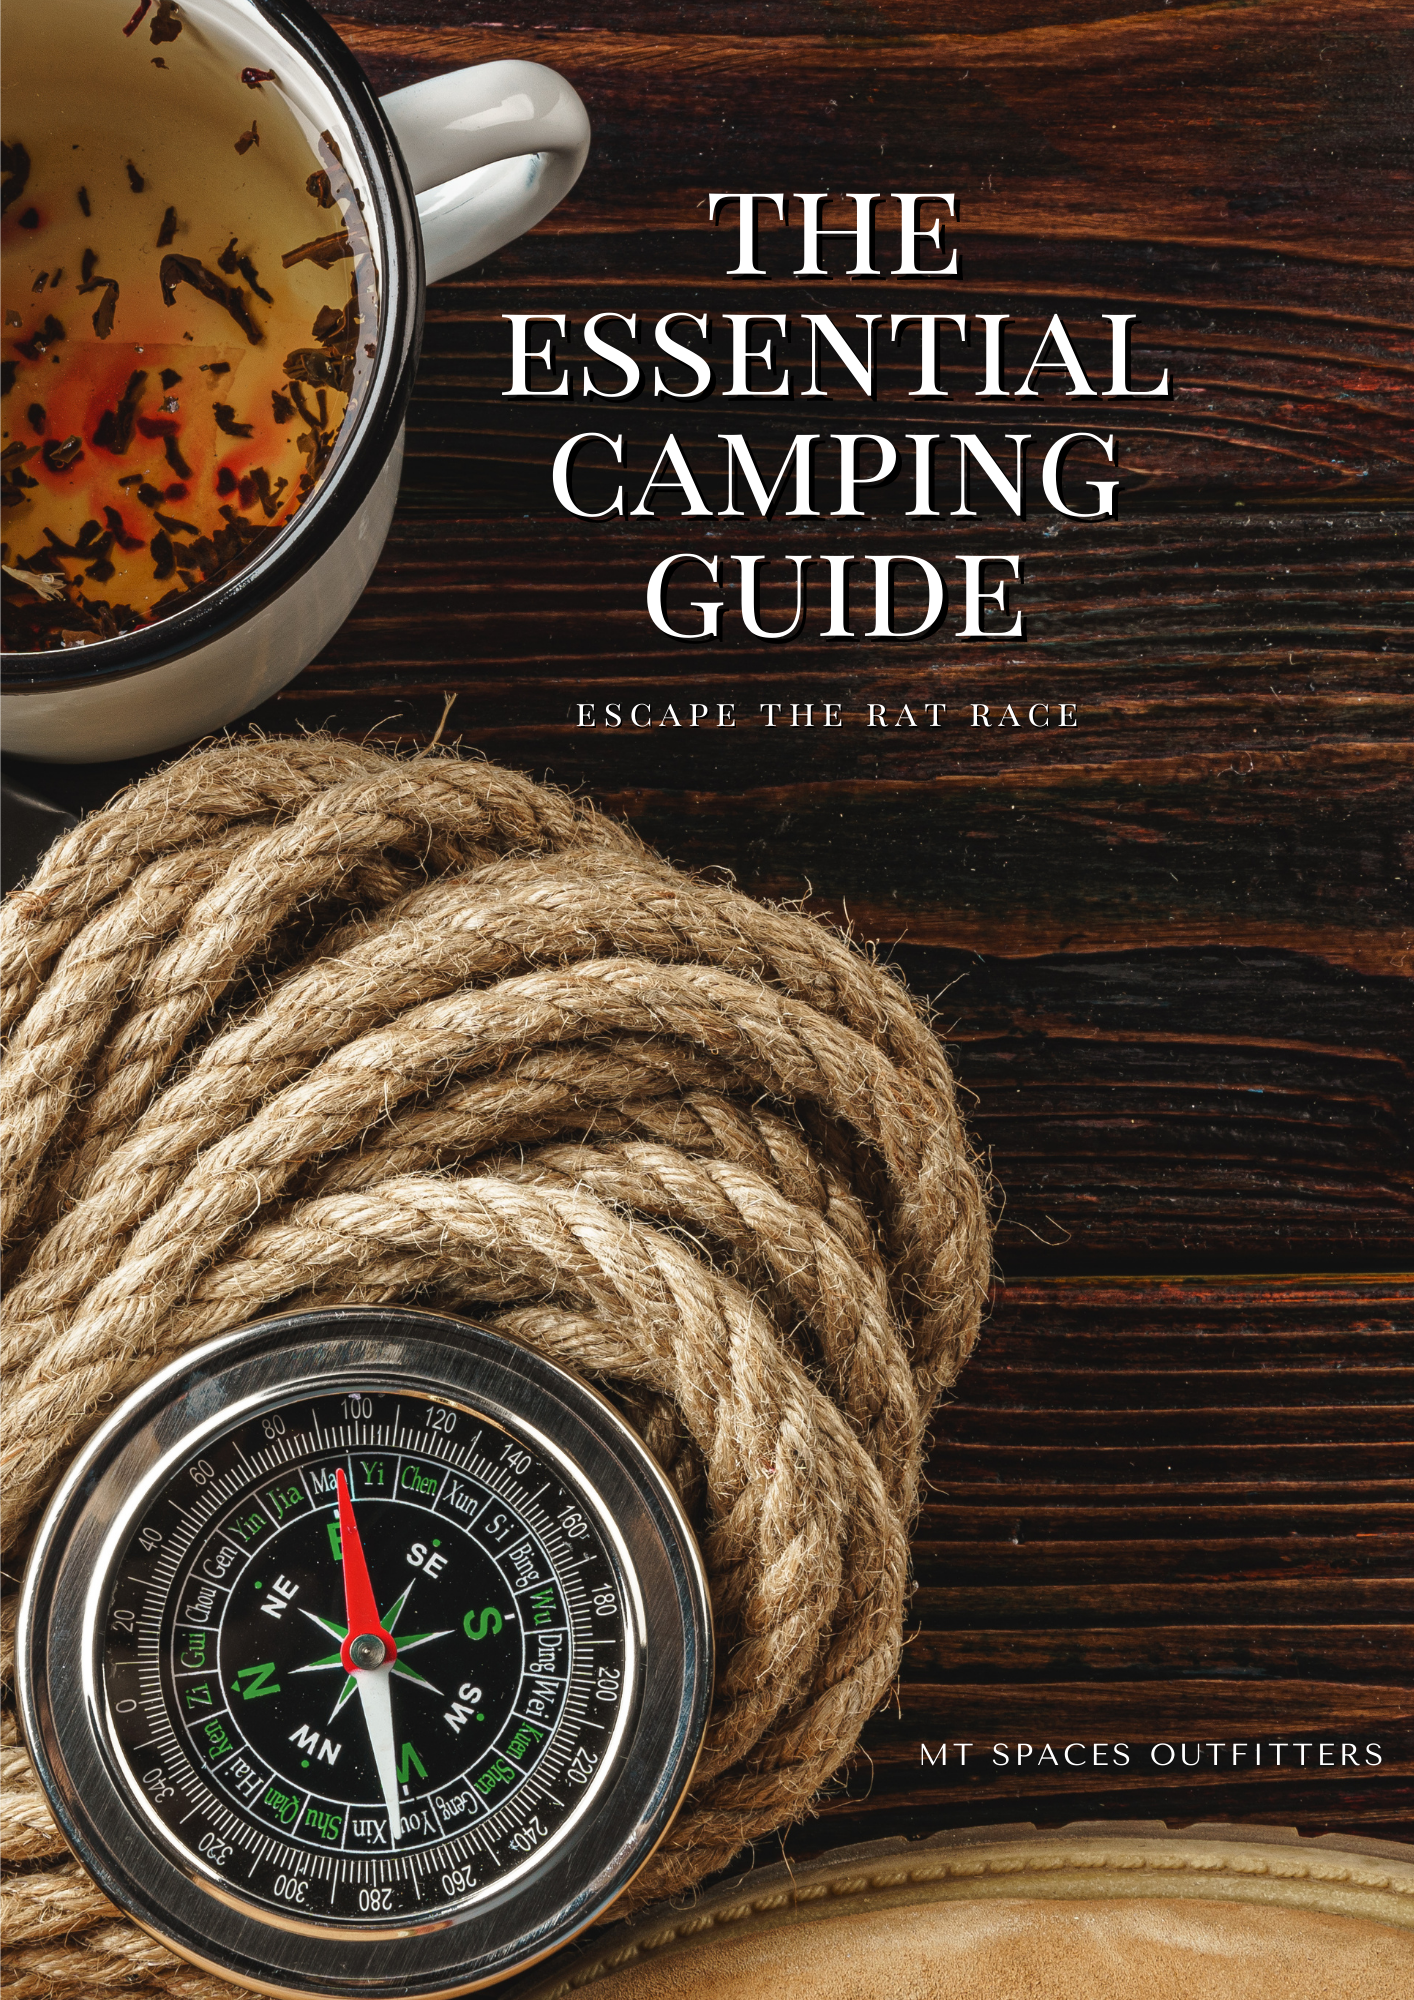 The Essential Camping Guide - MT Spaces Outfitters